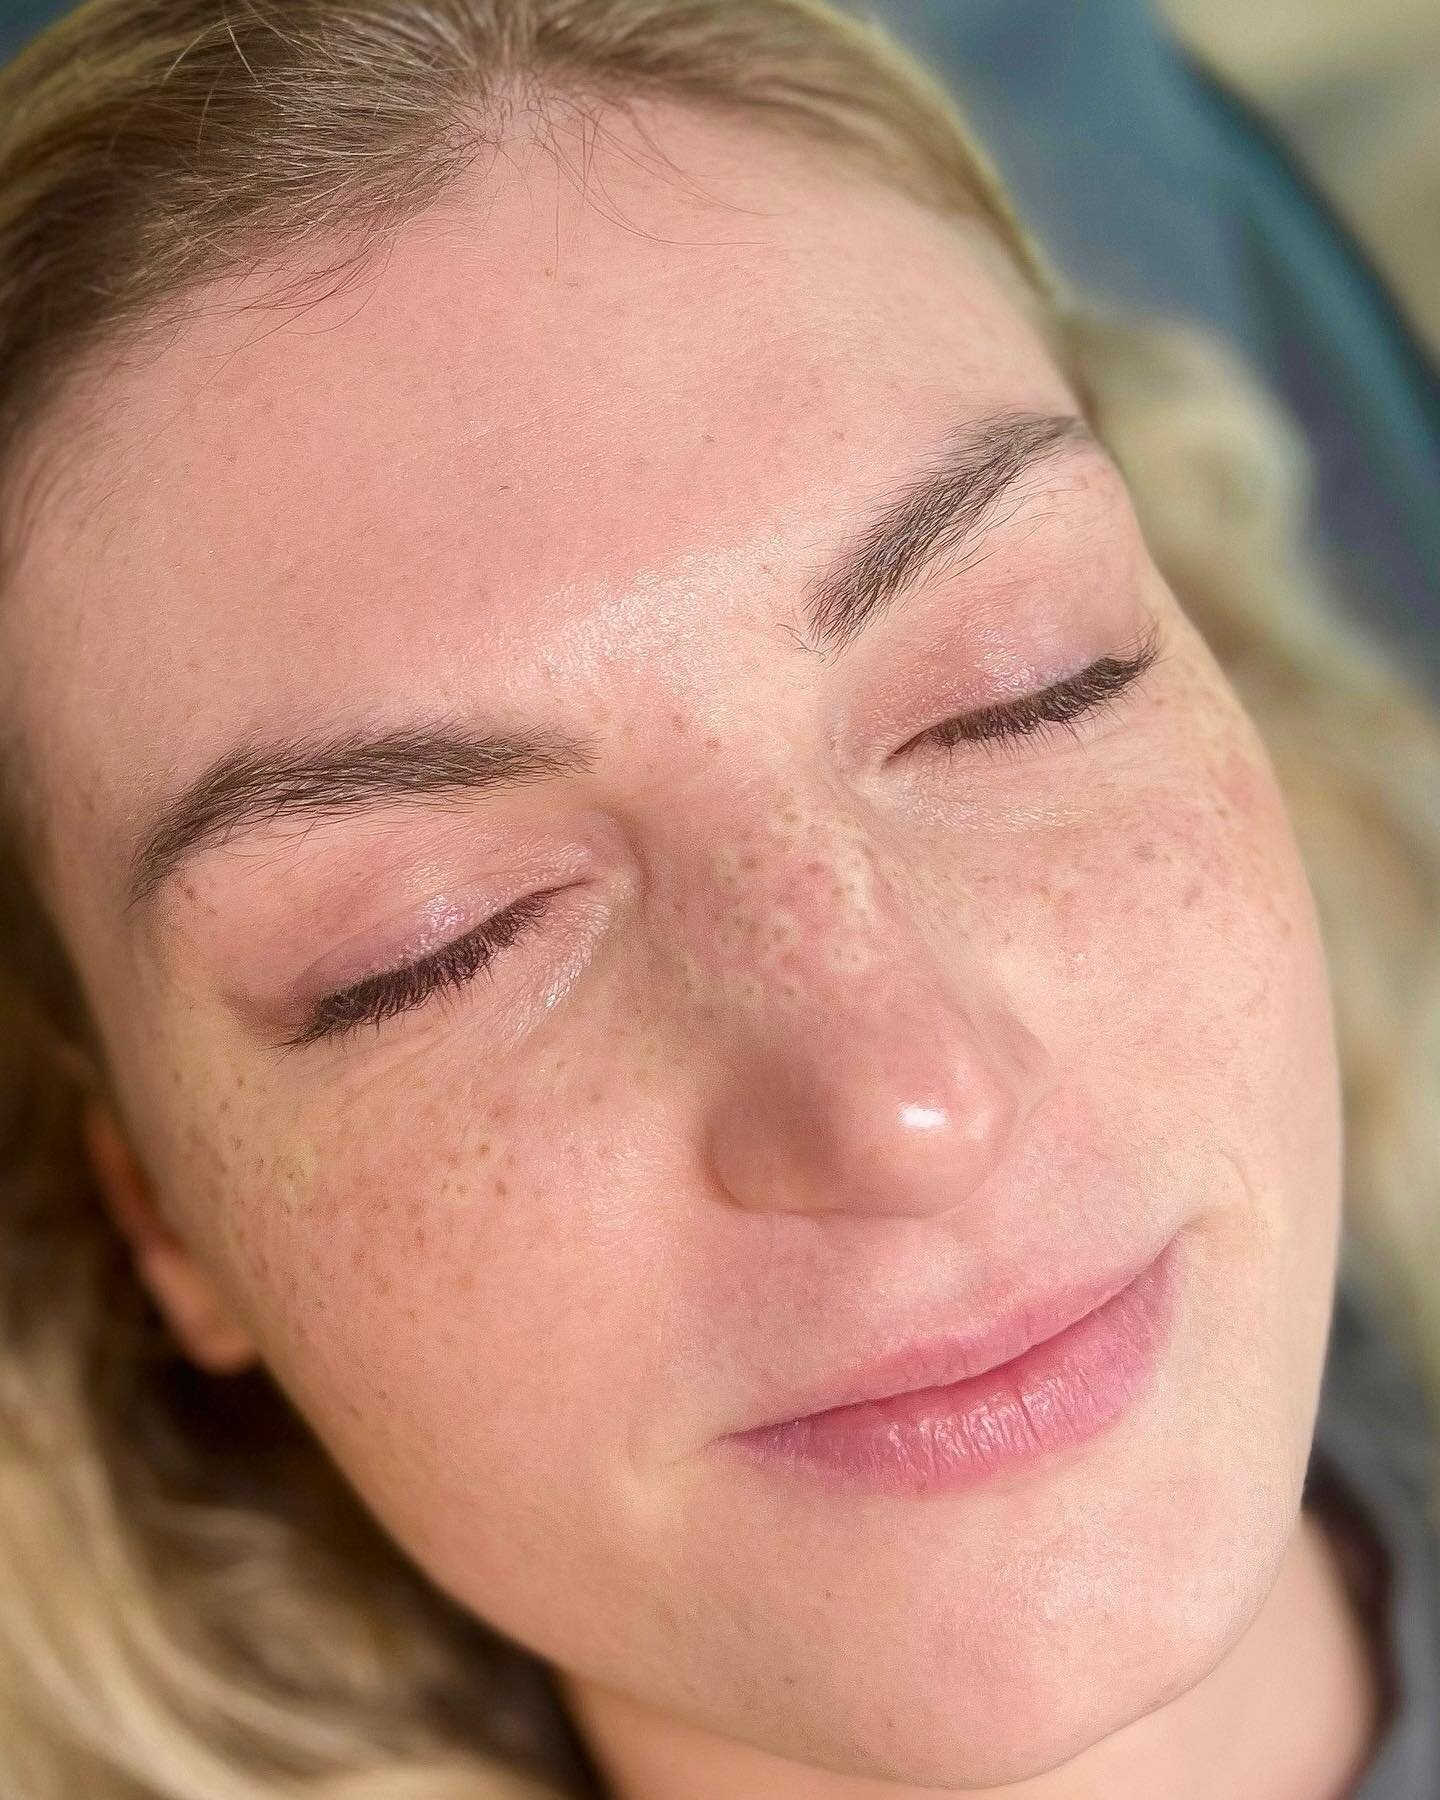 Fresh freckles looking so cute✨They fit her face so well!

The numbing cream that was used during her procedure causes the white ring you see around some of the freckles. This is not permanent and wears off in ~1 hour.

📍 Sumner, WA
Service - Medium